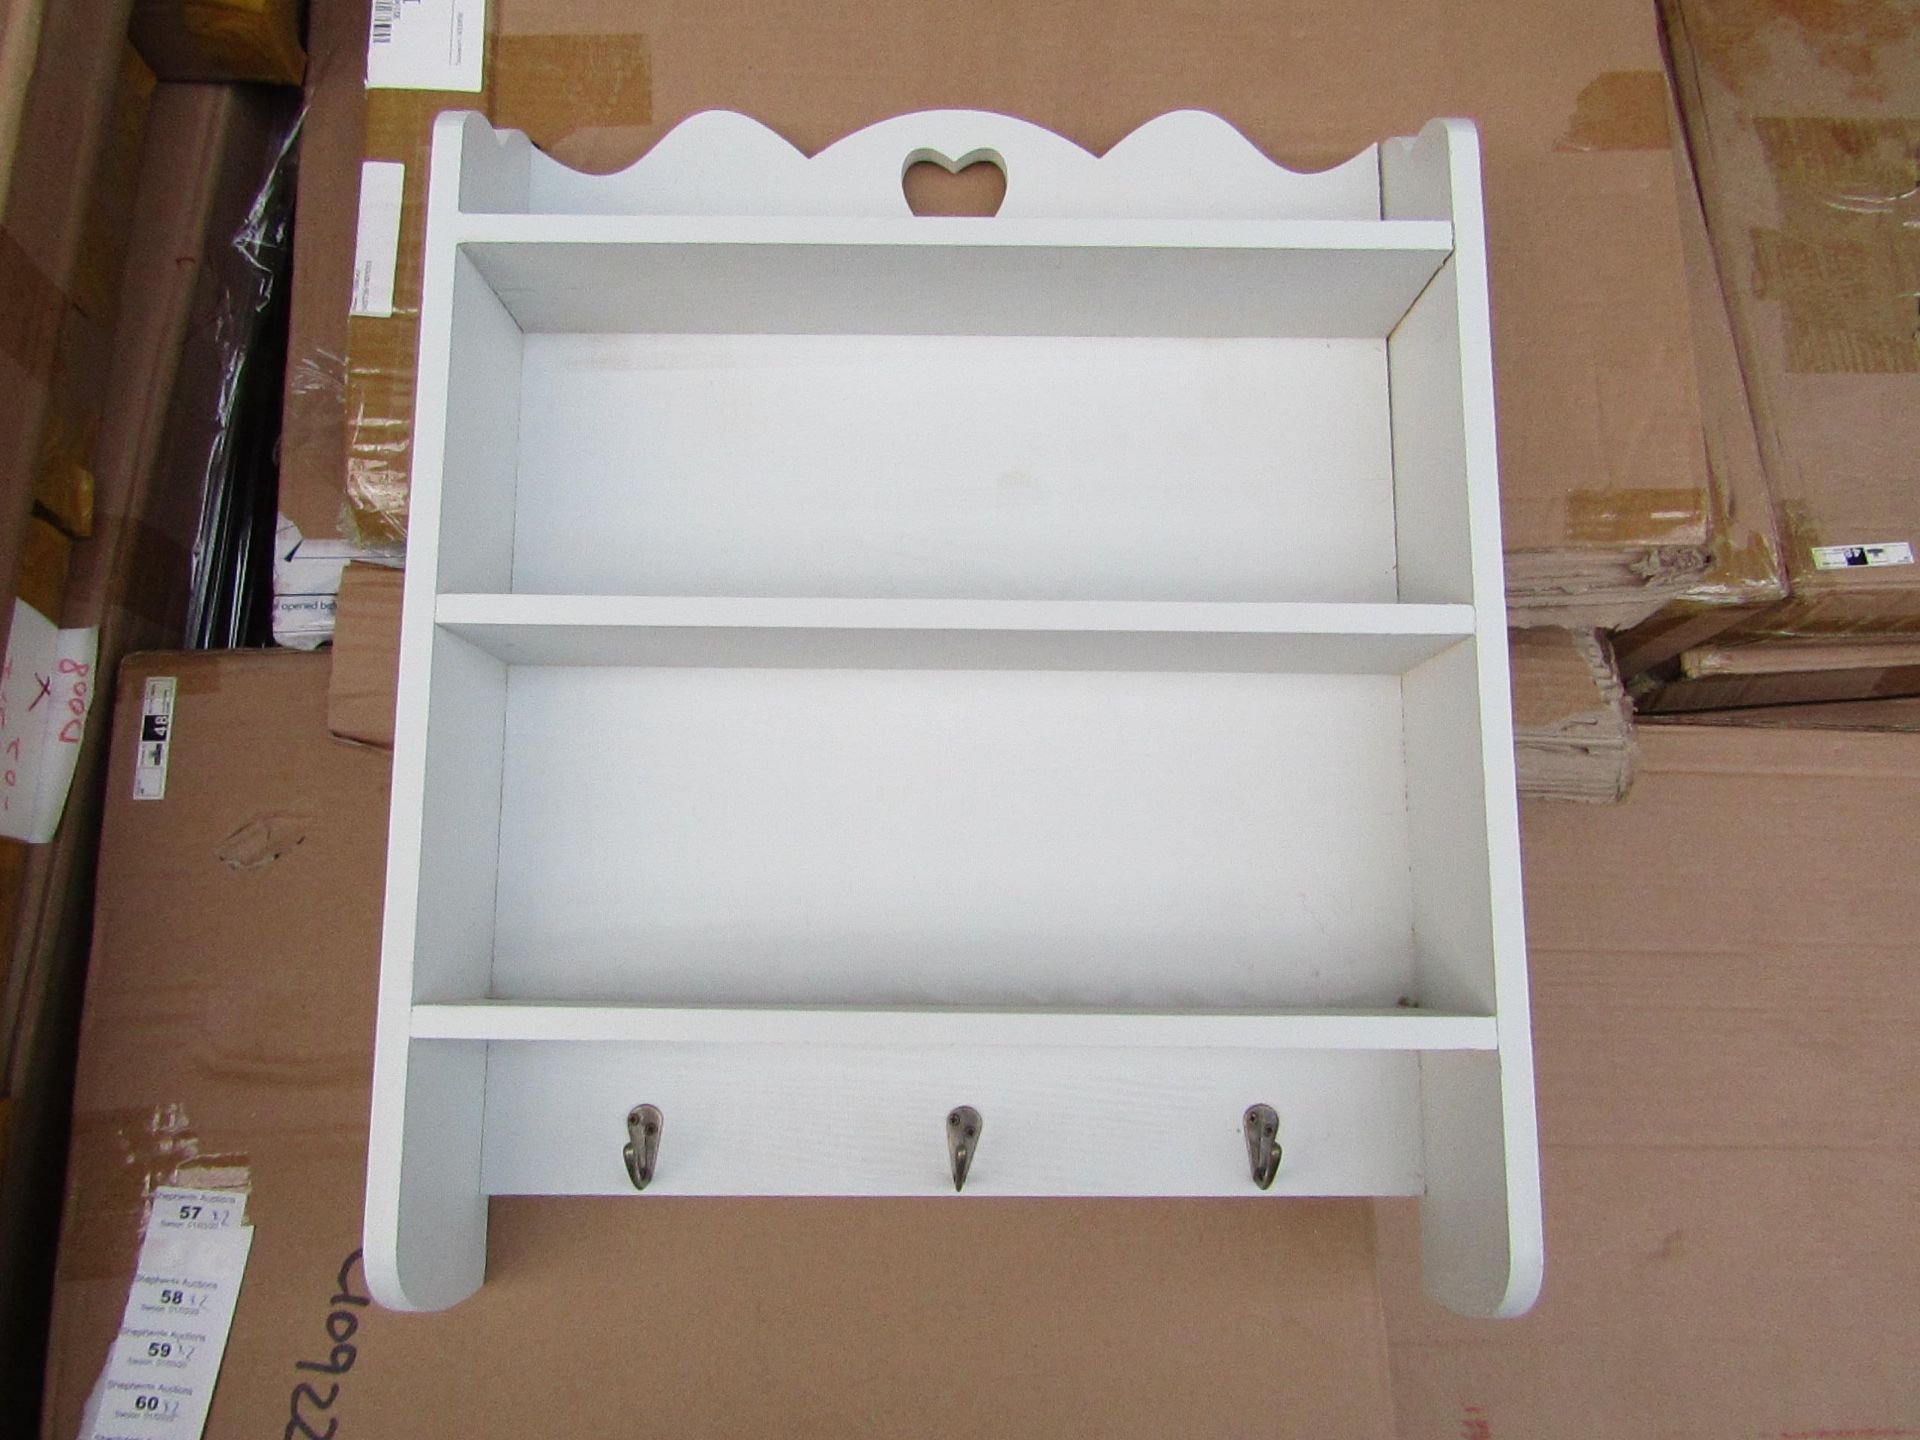 2 x Wall Shelf units with Hooks new & boxed